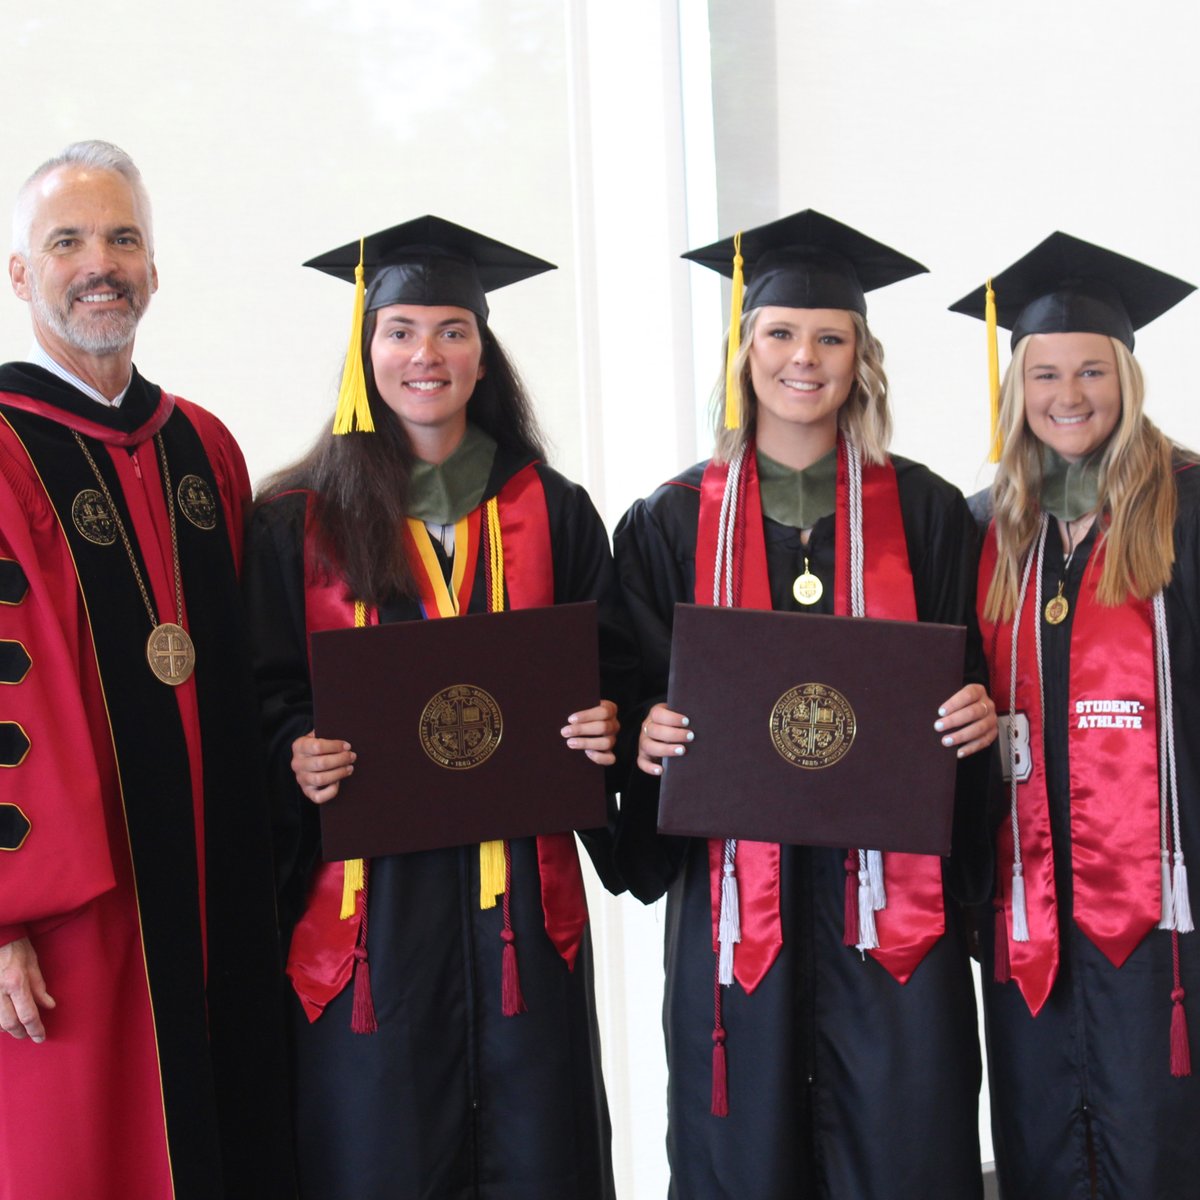 A special morning to put a 🎓 on graduation season! Be sure to click on the link below to see a full collection from this weekend's festivities #BleedCrimson #GoForGold 🔗 tinyurl.com/bd3teszh